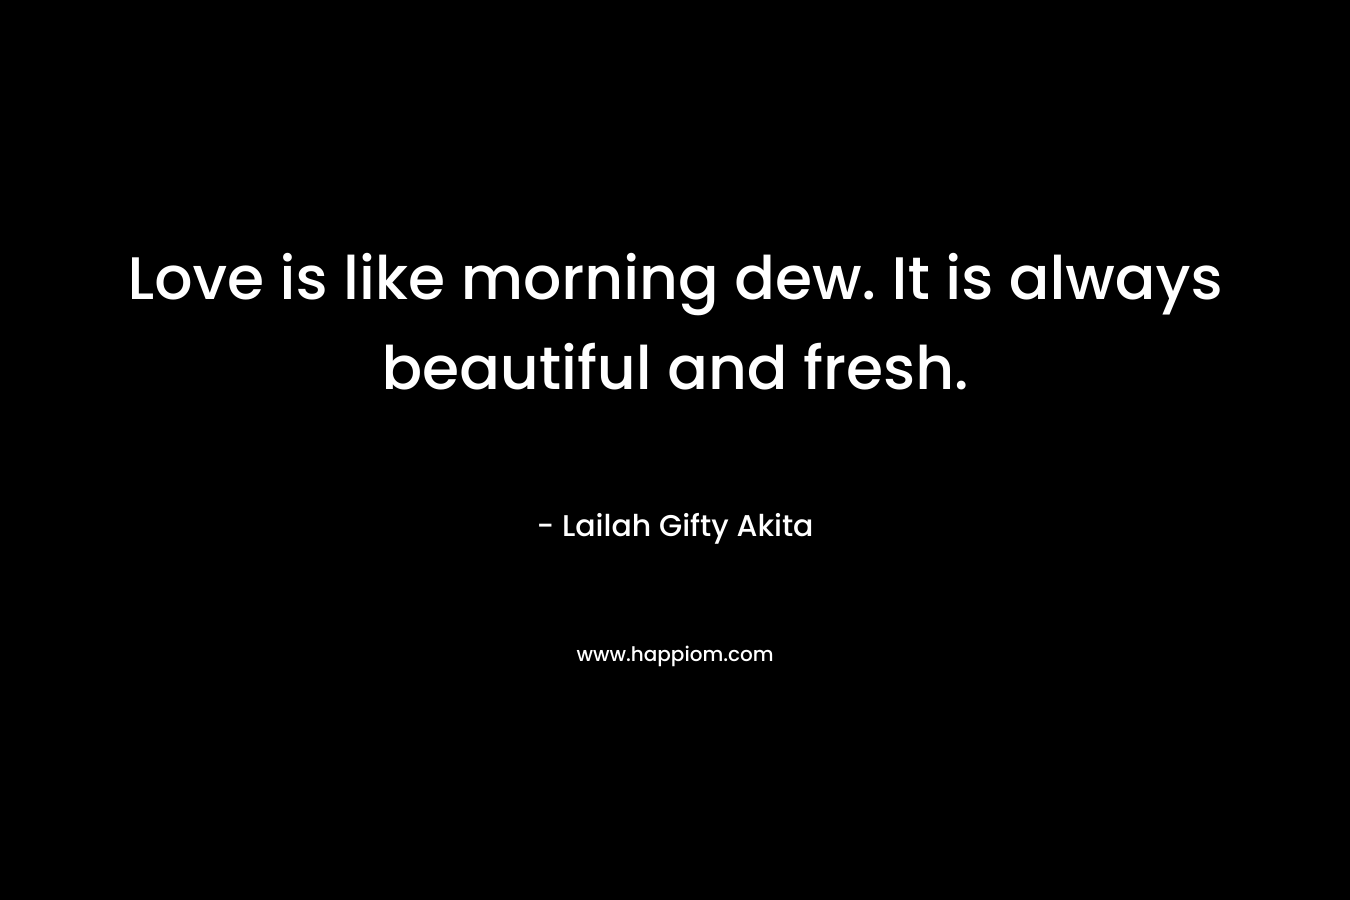 Love is like morning dew. It is always beautiful and fresh.